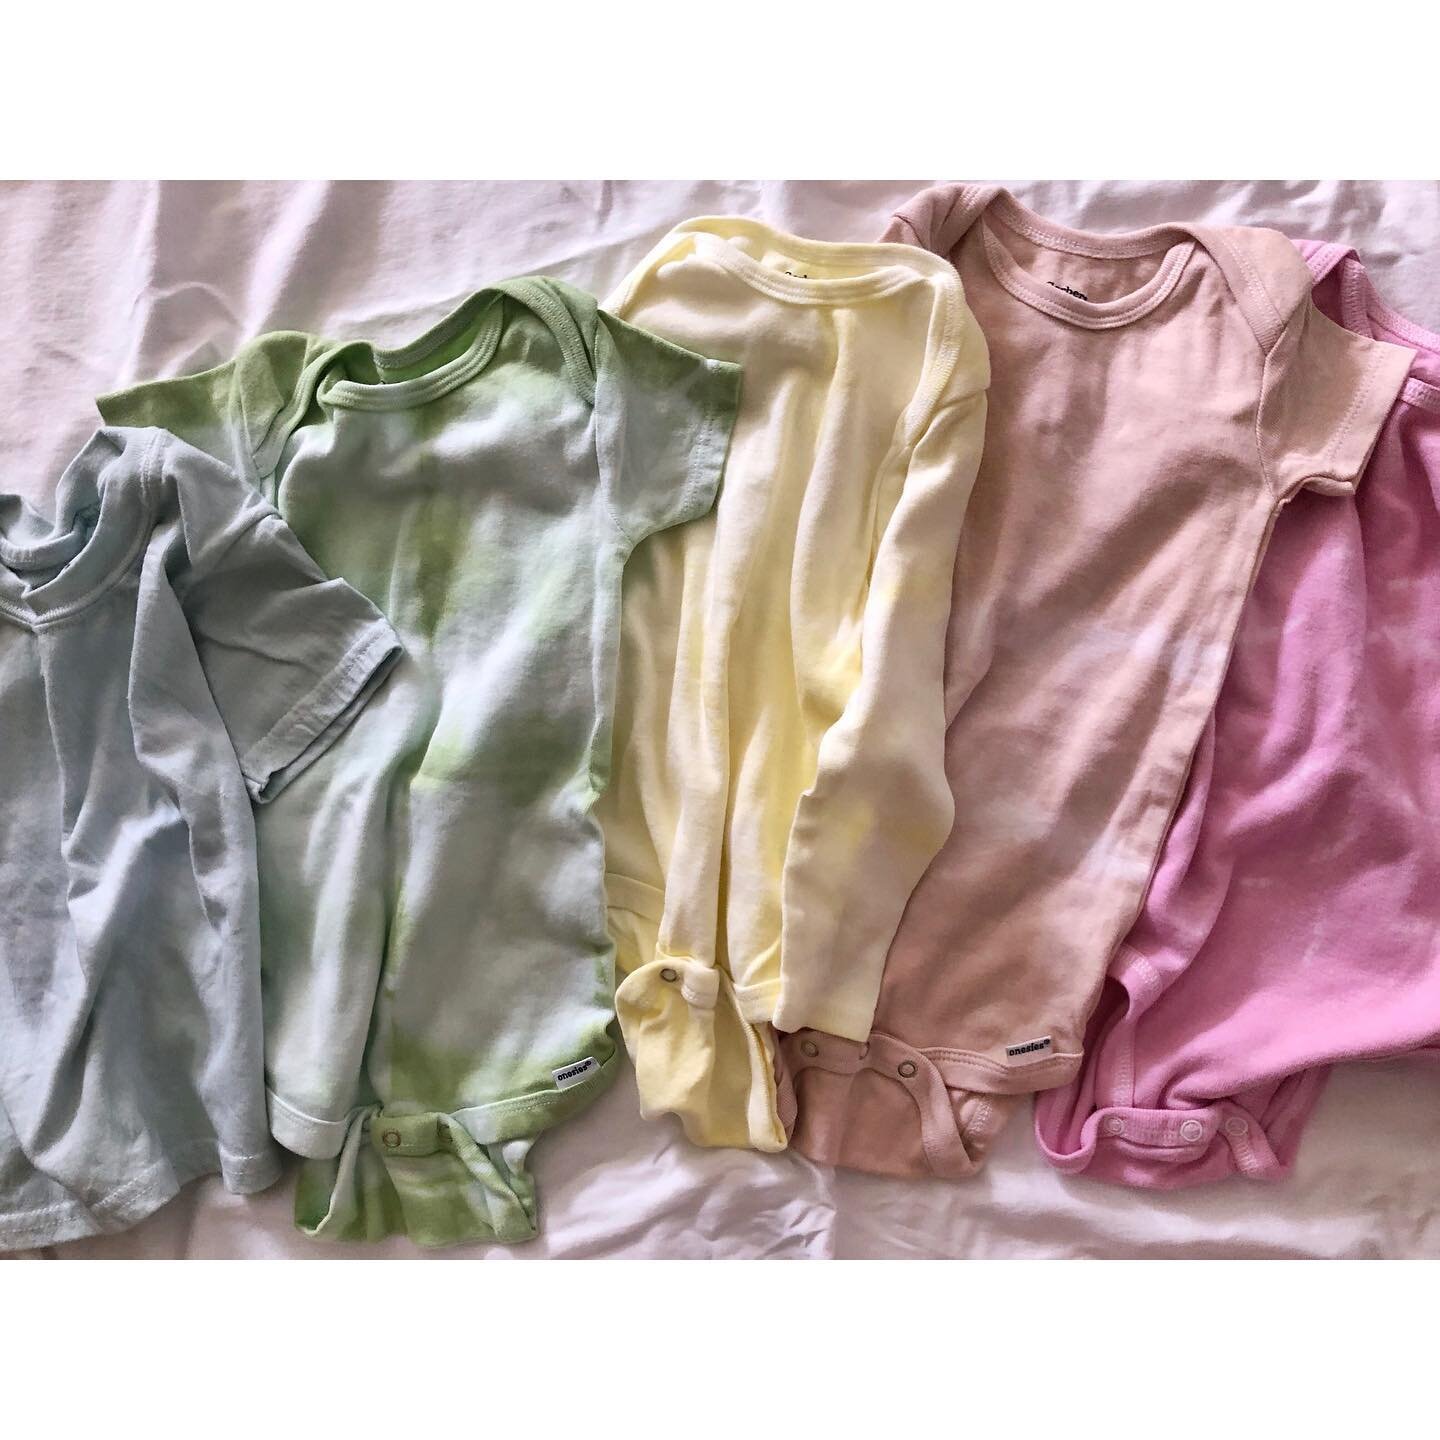 New Pastel Brights available on etsy! More coming to the shop next week! Handmade, Tie Dyed Onesies &amp; Toddler Tees.